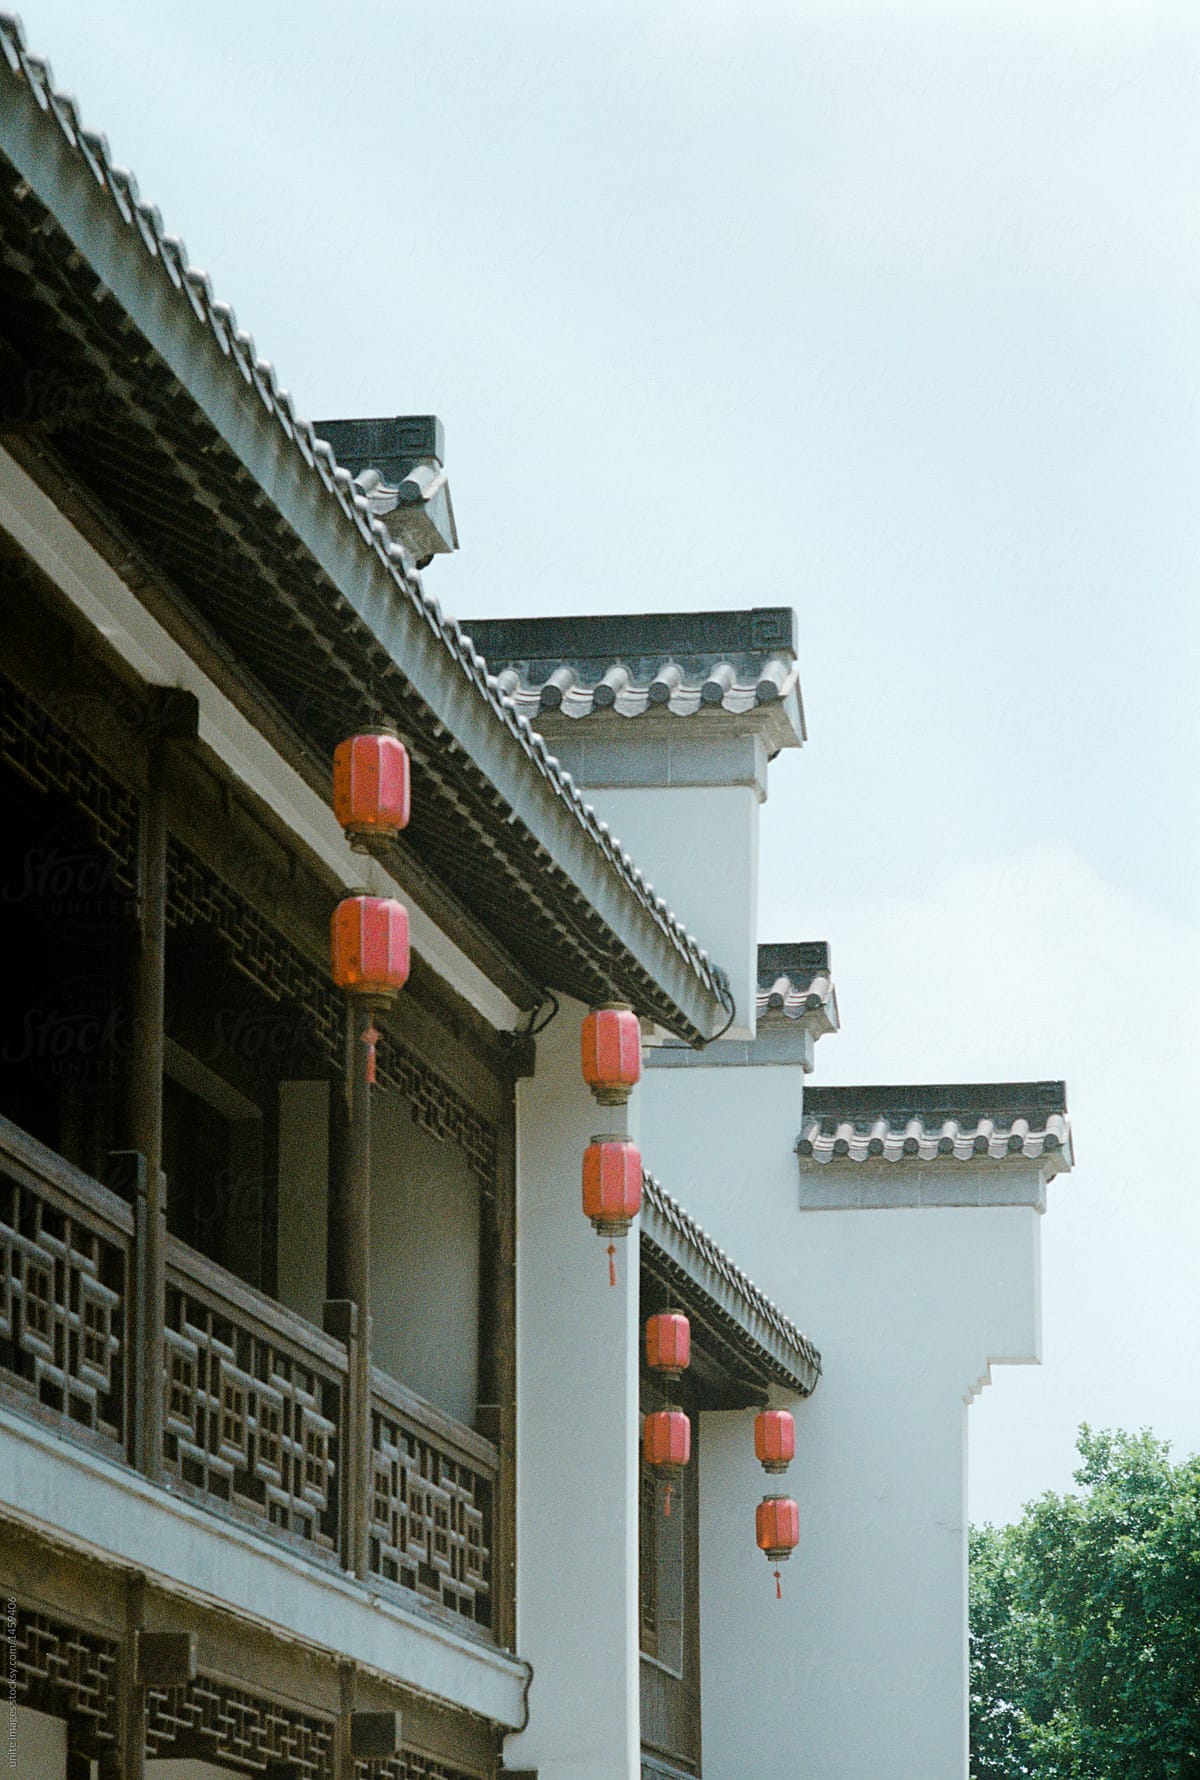 red lanterns hanging on tiled roof of traditional house,fuzimiao town,nanjing